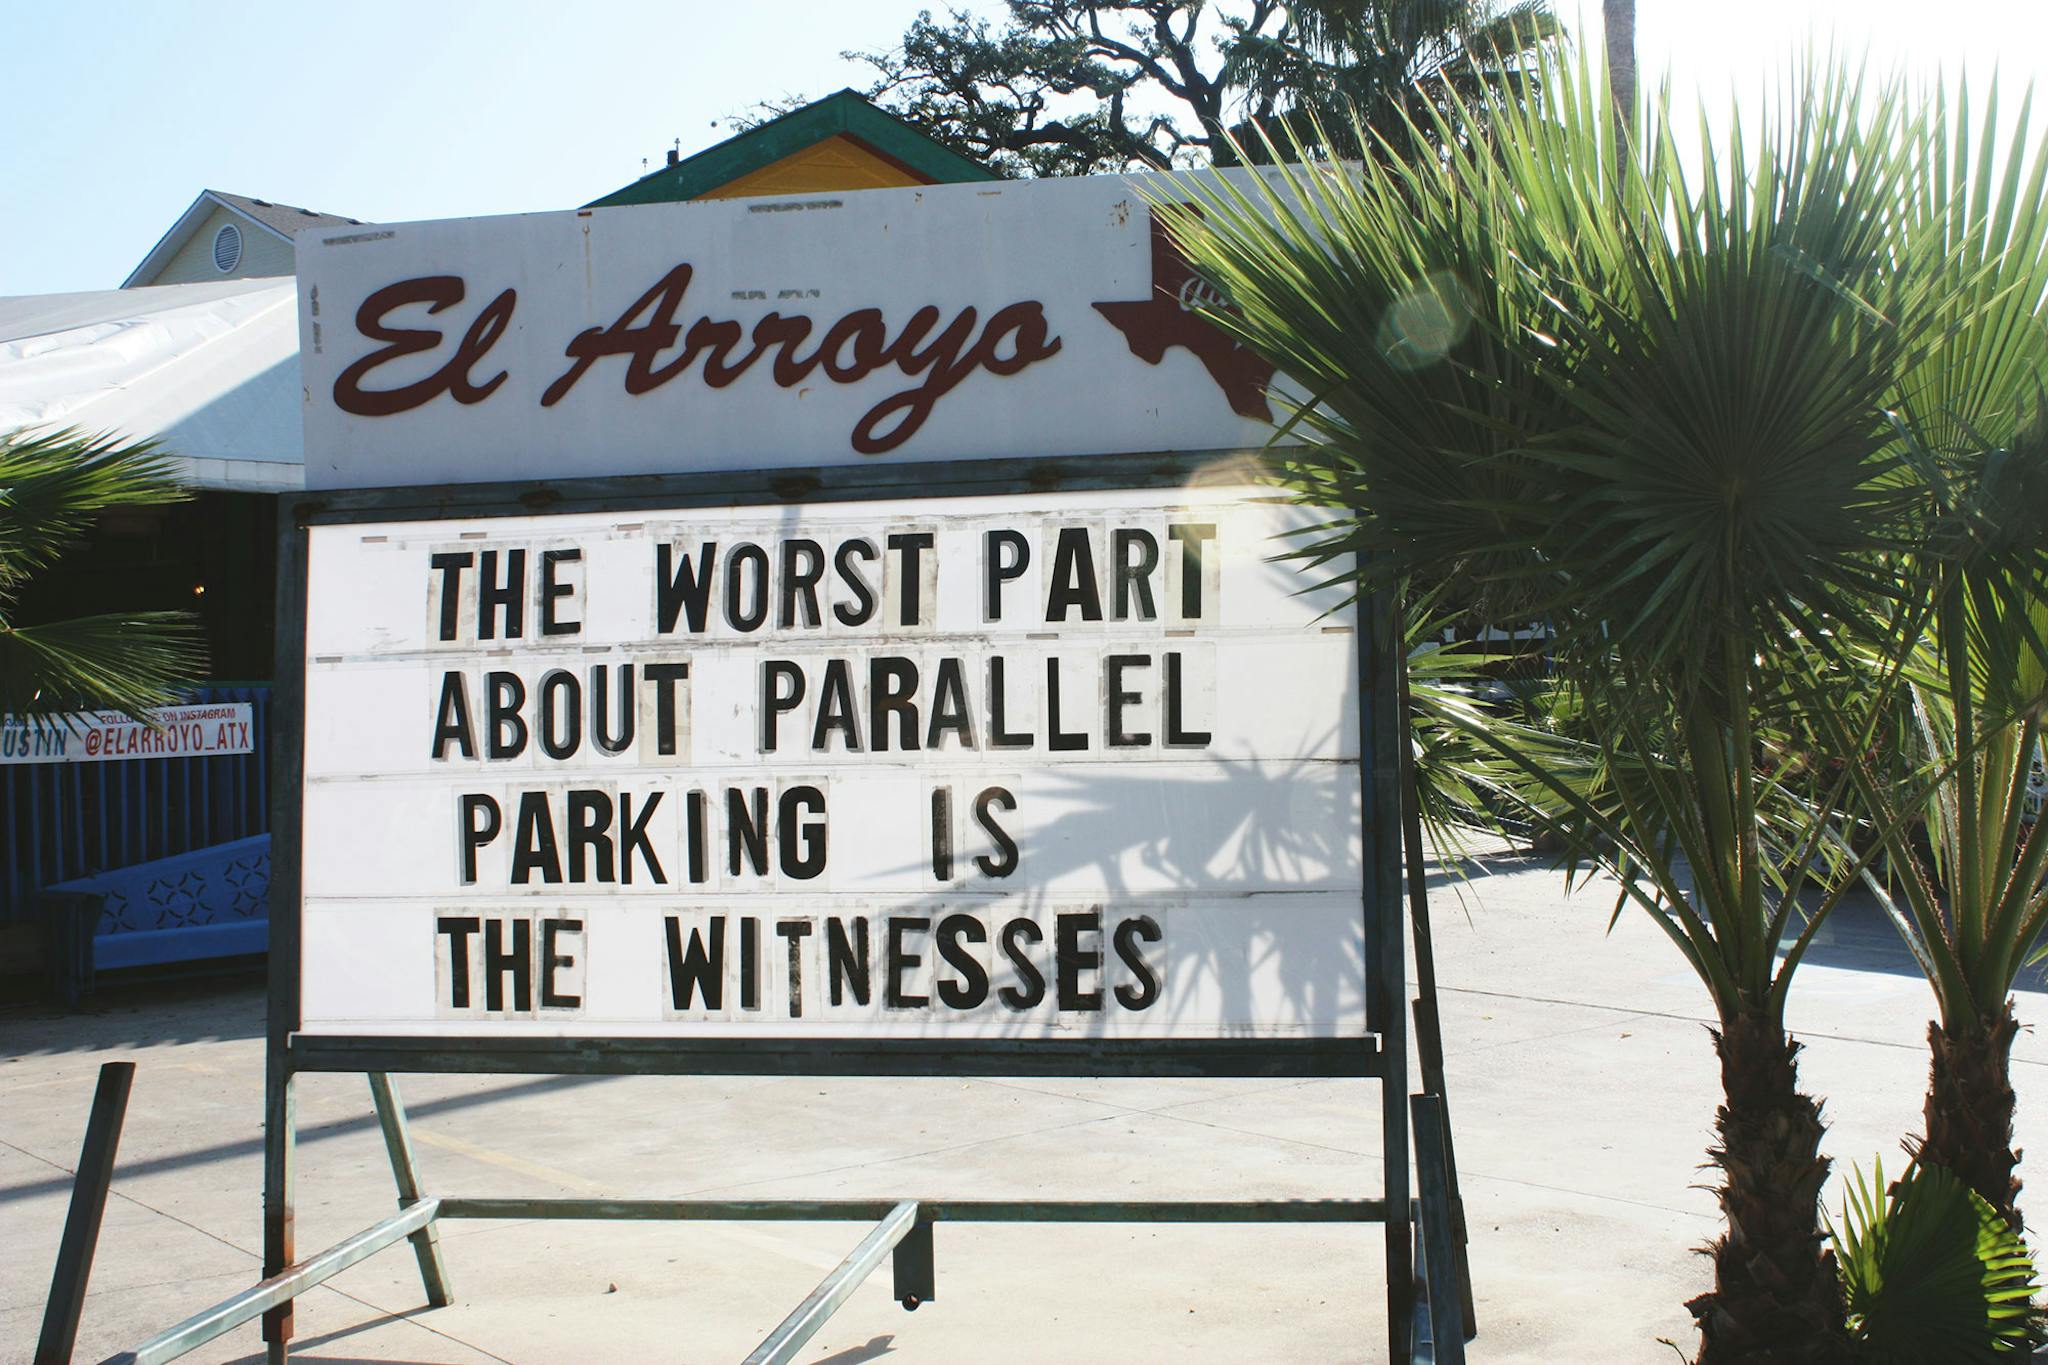 El Arroyo sign says the worst part about parallel parking is the witnesses.